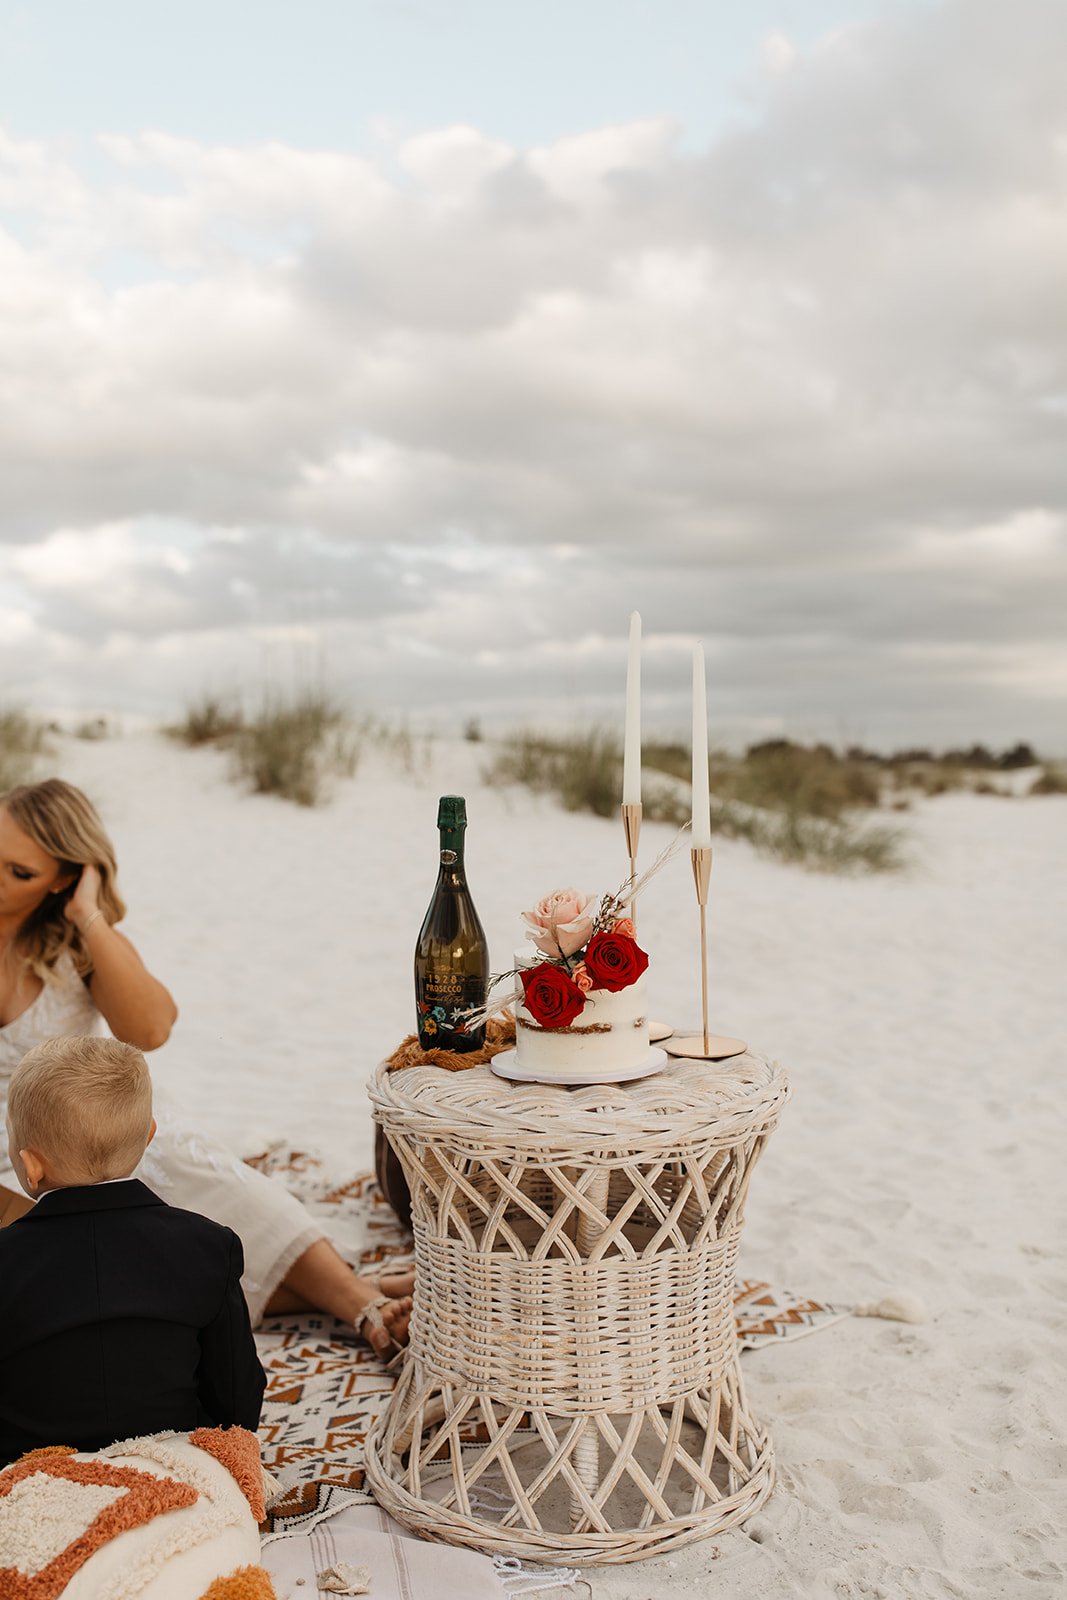 the boho picnic decorations at the beach elopement